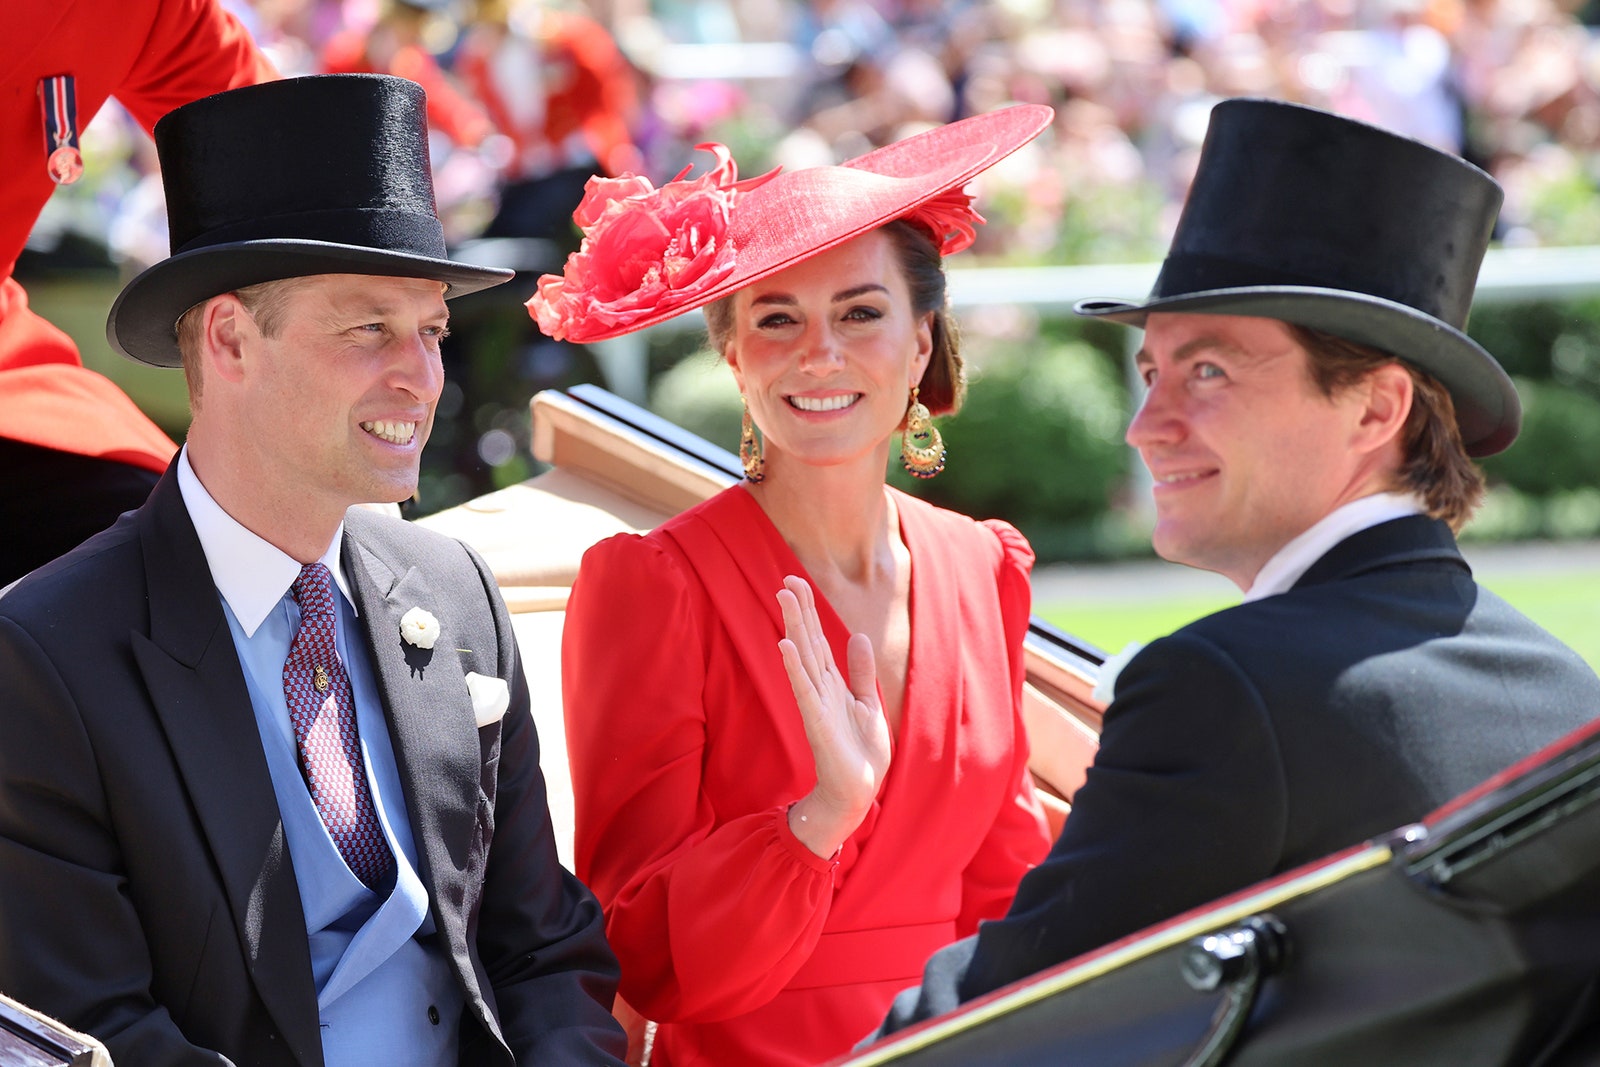 Kate Middleton Is the Lady in Red at the Royal Ascot Fashnfly